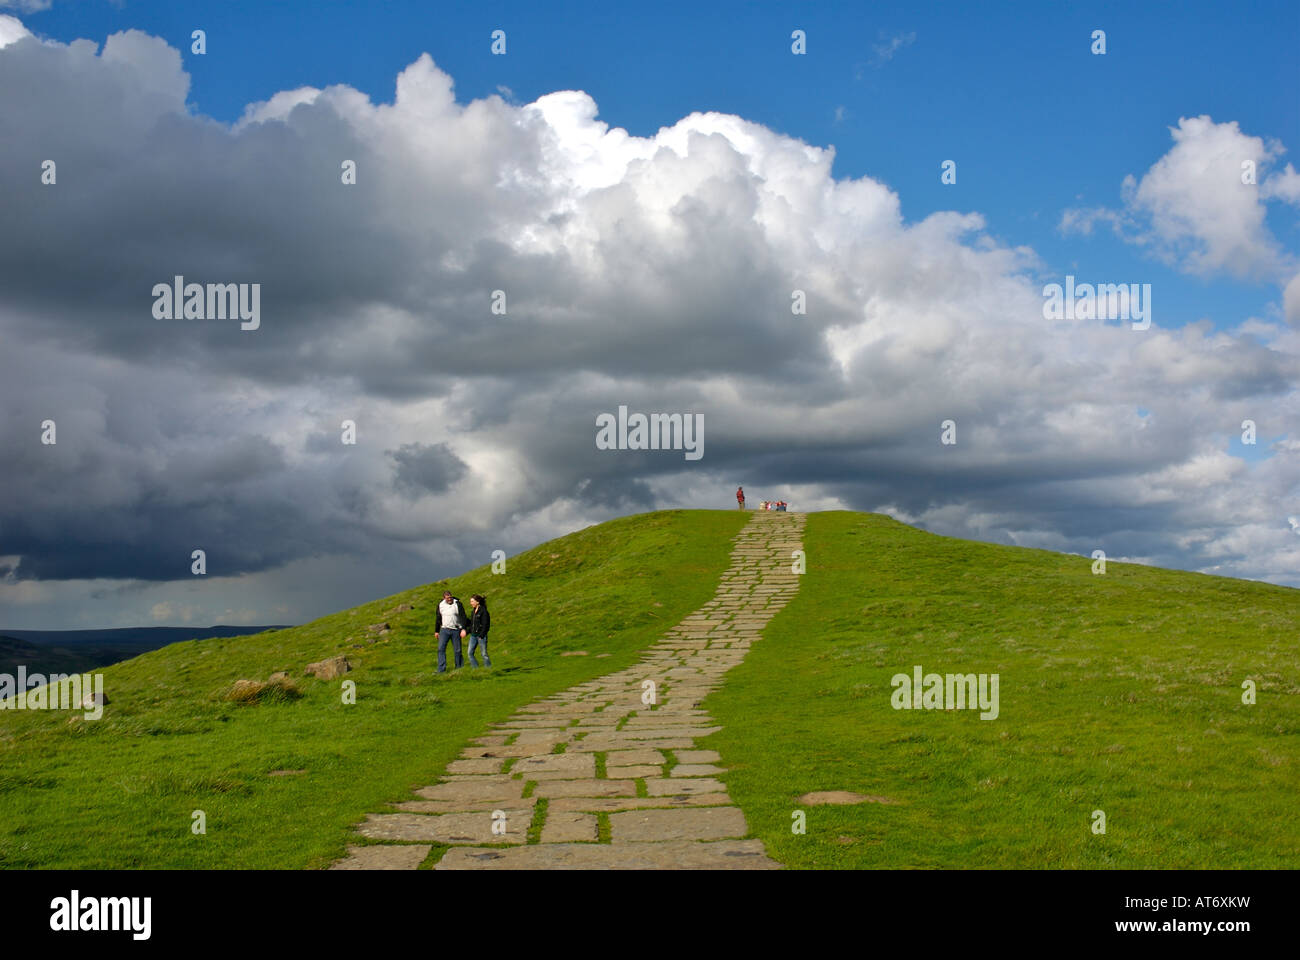 Walkers and paved path, leading to the top of Mam Tor, overlooking the Edale valley, Peak National Park, Derbyshire UK Stock Photo